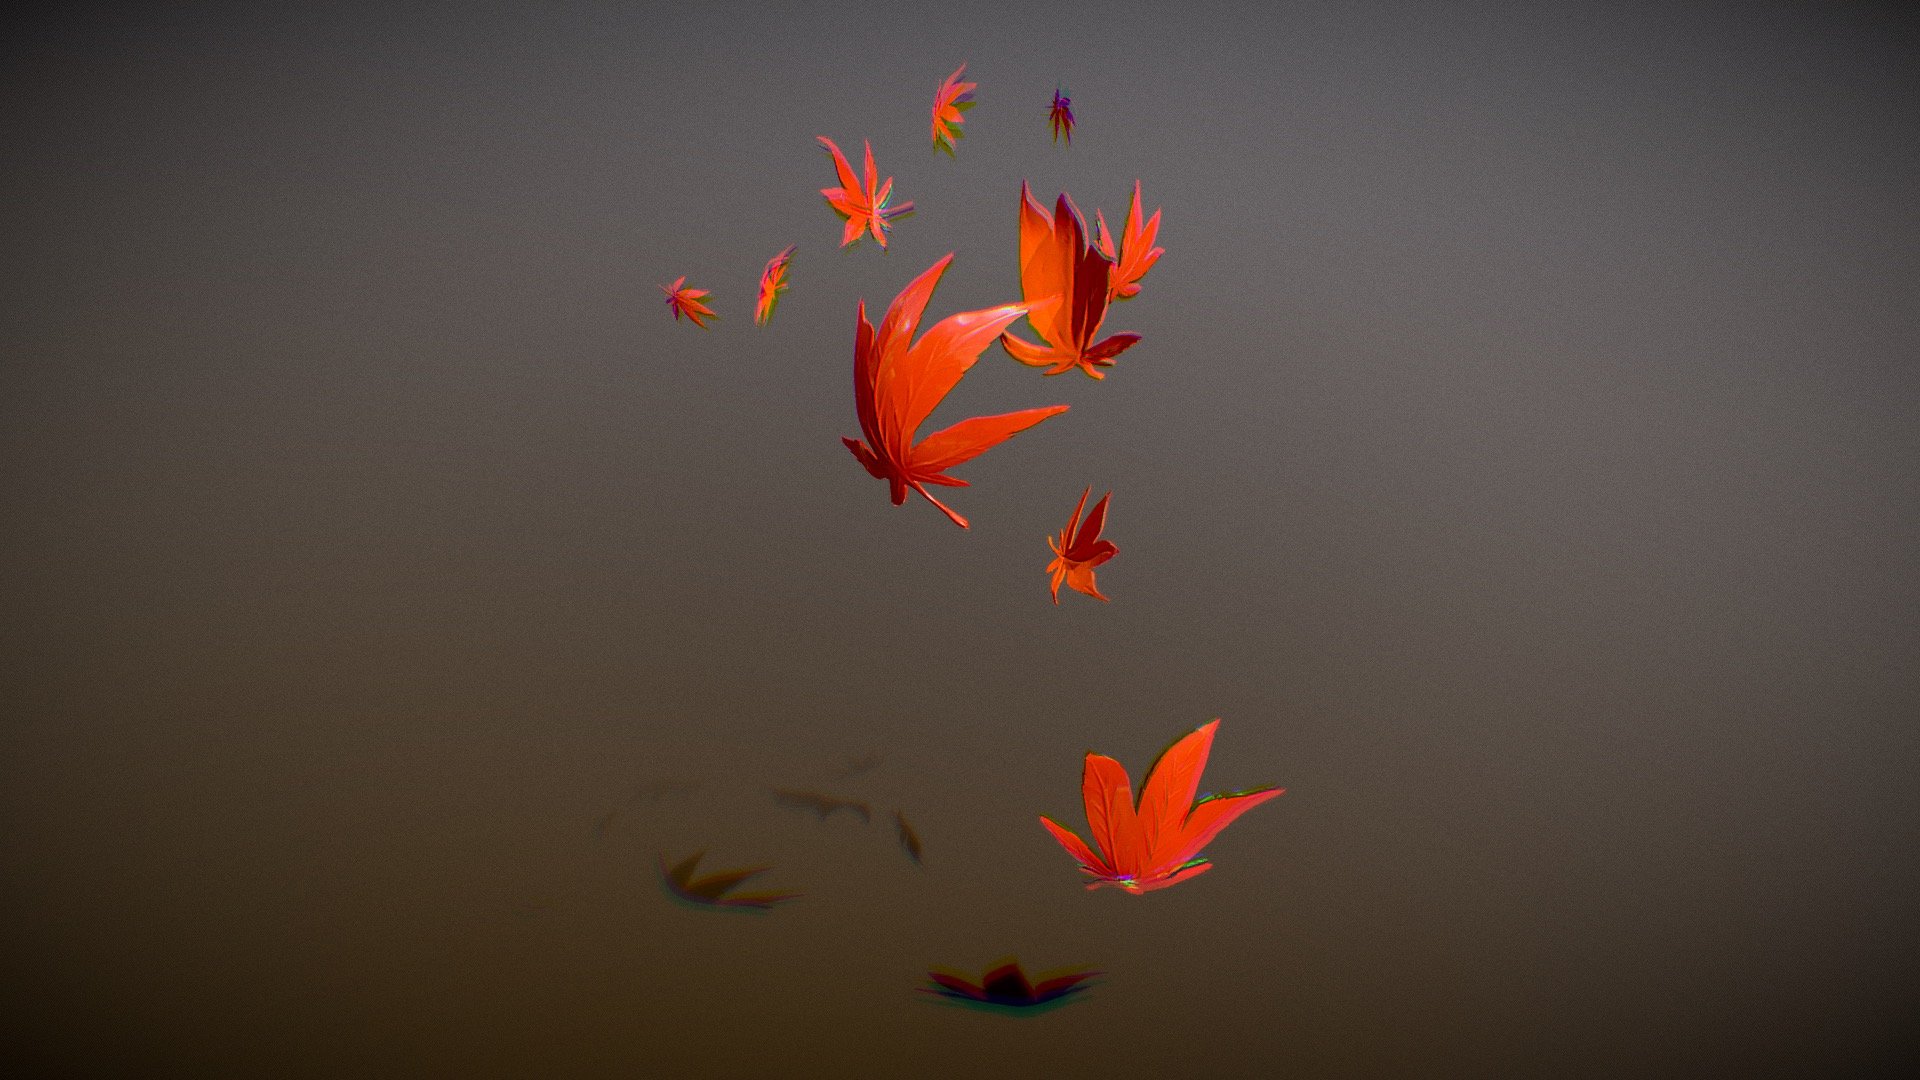 a few leafs floating in the air. Japanese mapple leafs
.
Suitable for creating scenary with leafs falling or floating around mapple trees or even to put in the crown of the tree 3d model